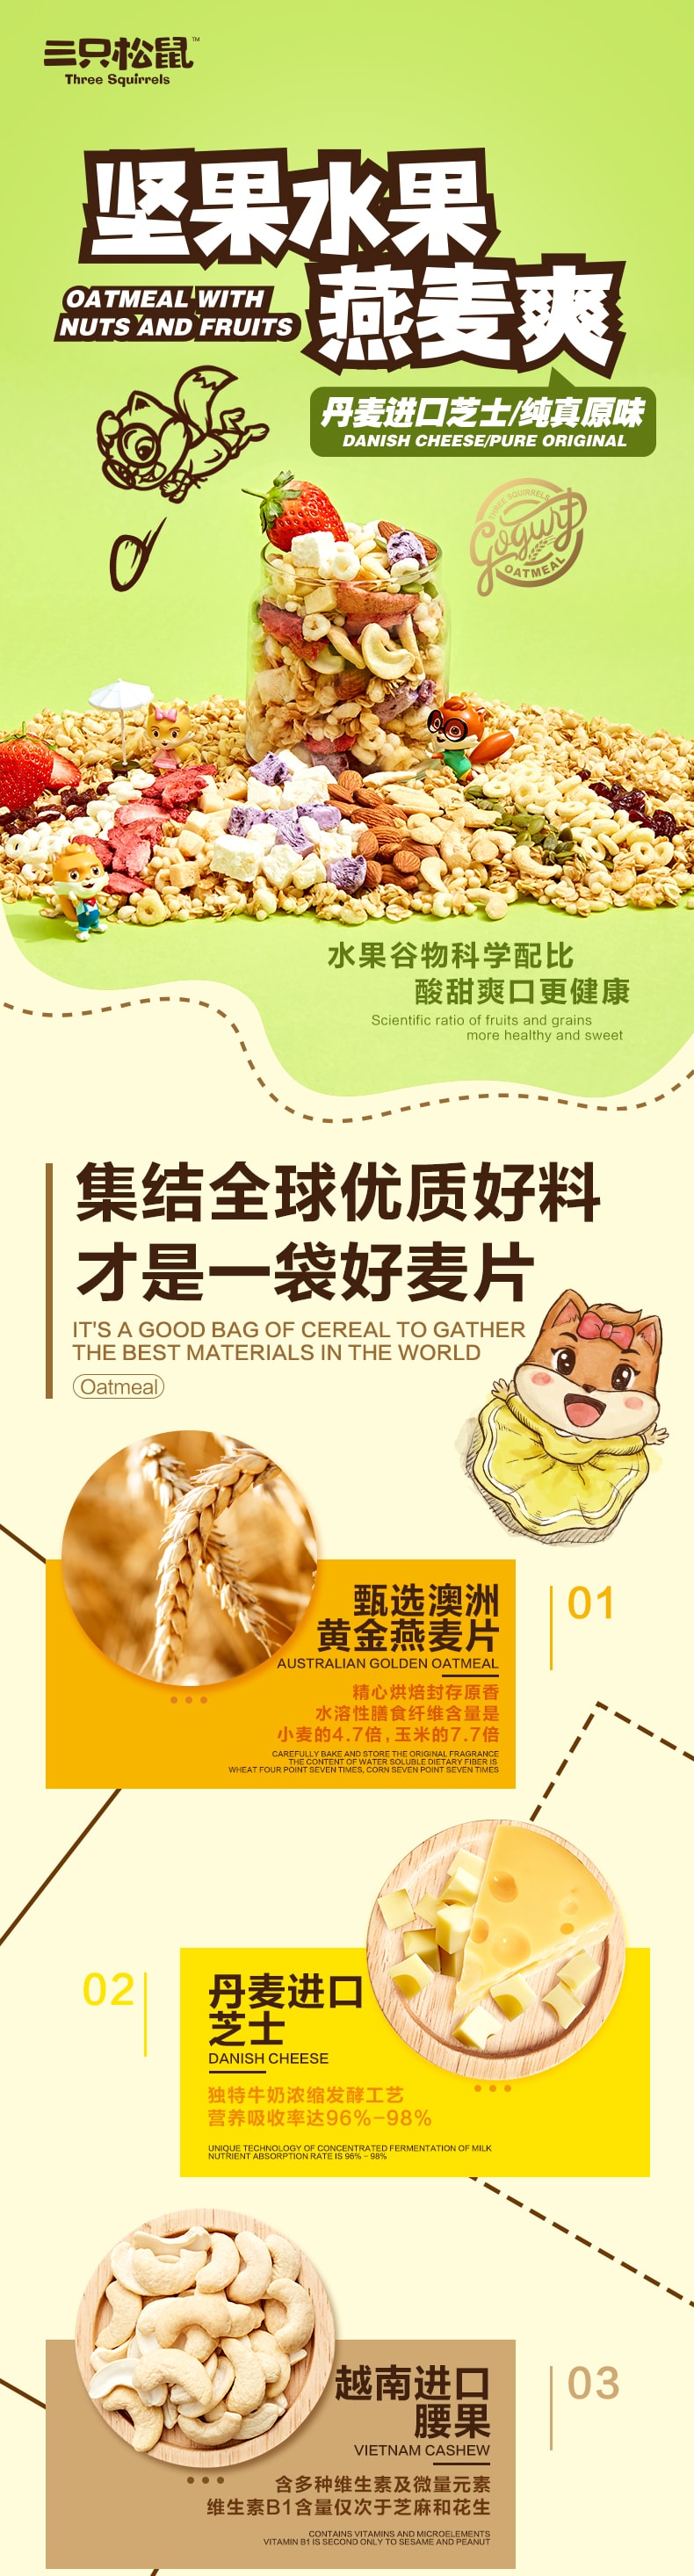 [China Direct Mail] Three SquirrelsFruit Nut Oatmeal Breakfast Fast Food Lazy Meal Replacement Instant Grain Food 400g